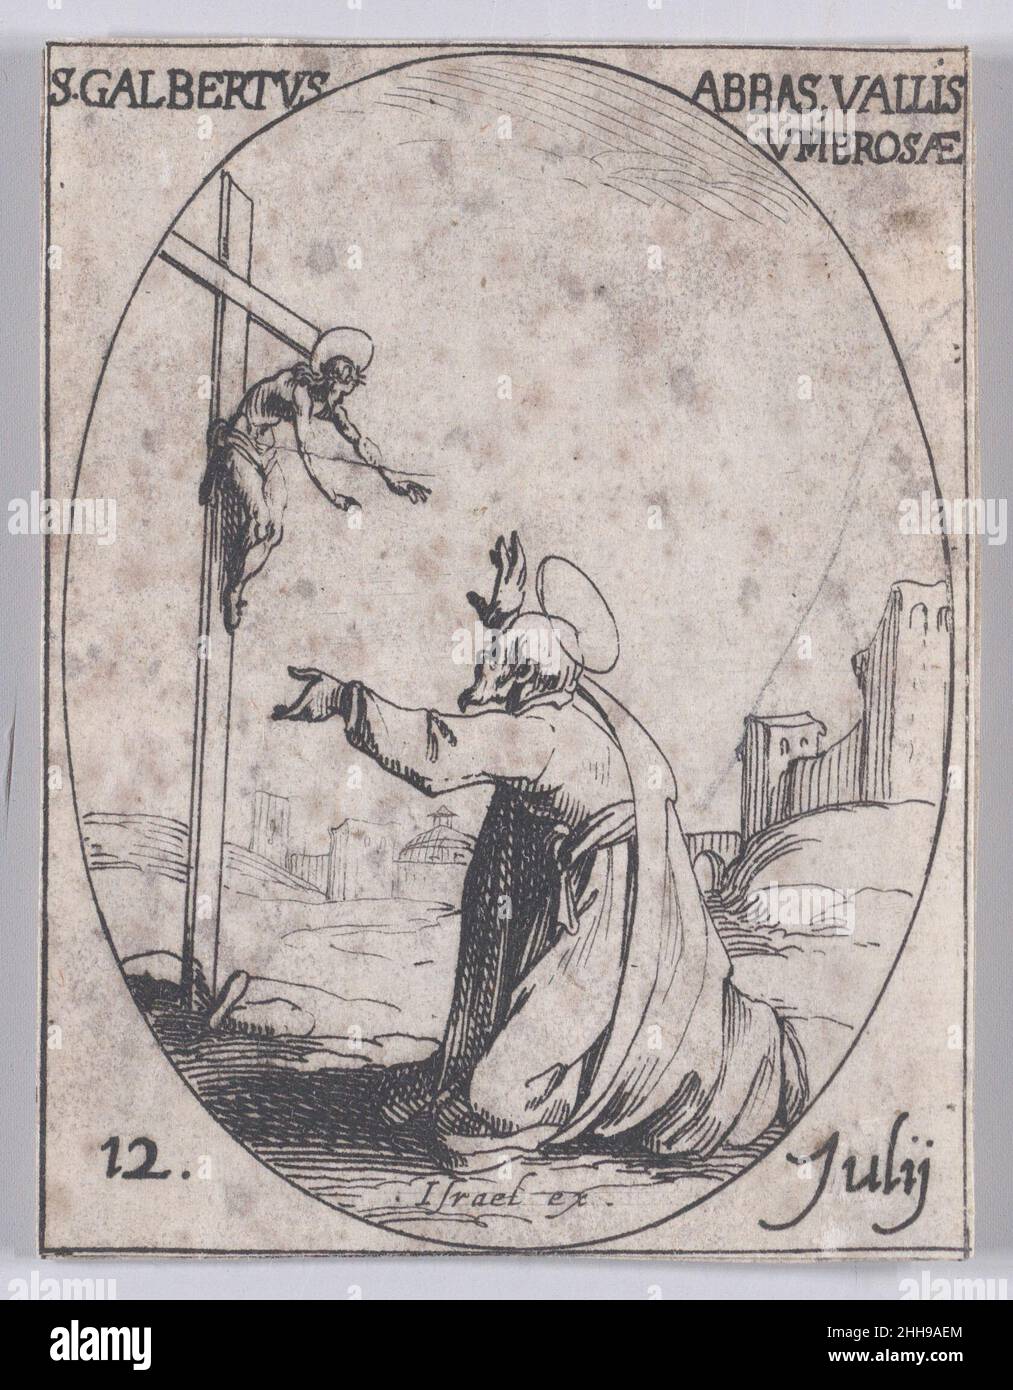 S. Galbert, abbé du Val d'Ombrose (St. John Gualbert, Abbot of Val d'Ombrose), July 12th, from Les Images De Tous Les Saincts et Saintes de L'Année (Images of All of the Saints and Religious Events of the Year) 1636 Jacques Callot French This print is part of a series comprised of a title page, frontispiece, and 122 plates. Each of these 122 plates contains four oval scenes depicting Saints and Religious Events for each day of the year. This etching was originally one of four oval scenes on a plate in the series.. S. Galbert, abbé du Val d'Ombrose (St. John Gualbert, Abbot of Val d'Ombrose), J Stock Photo